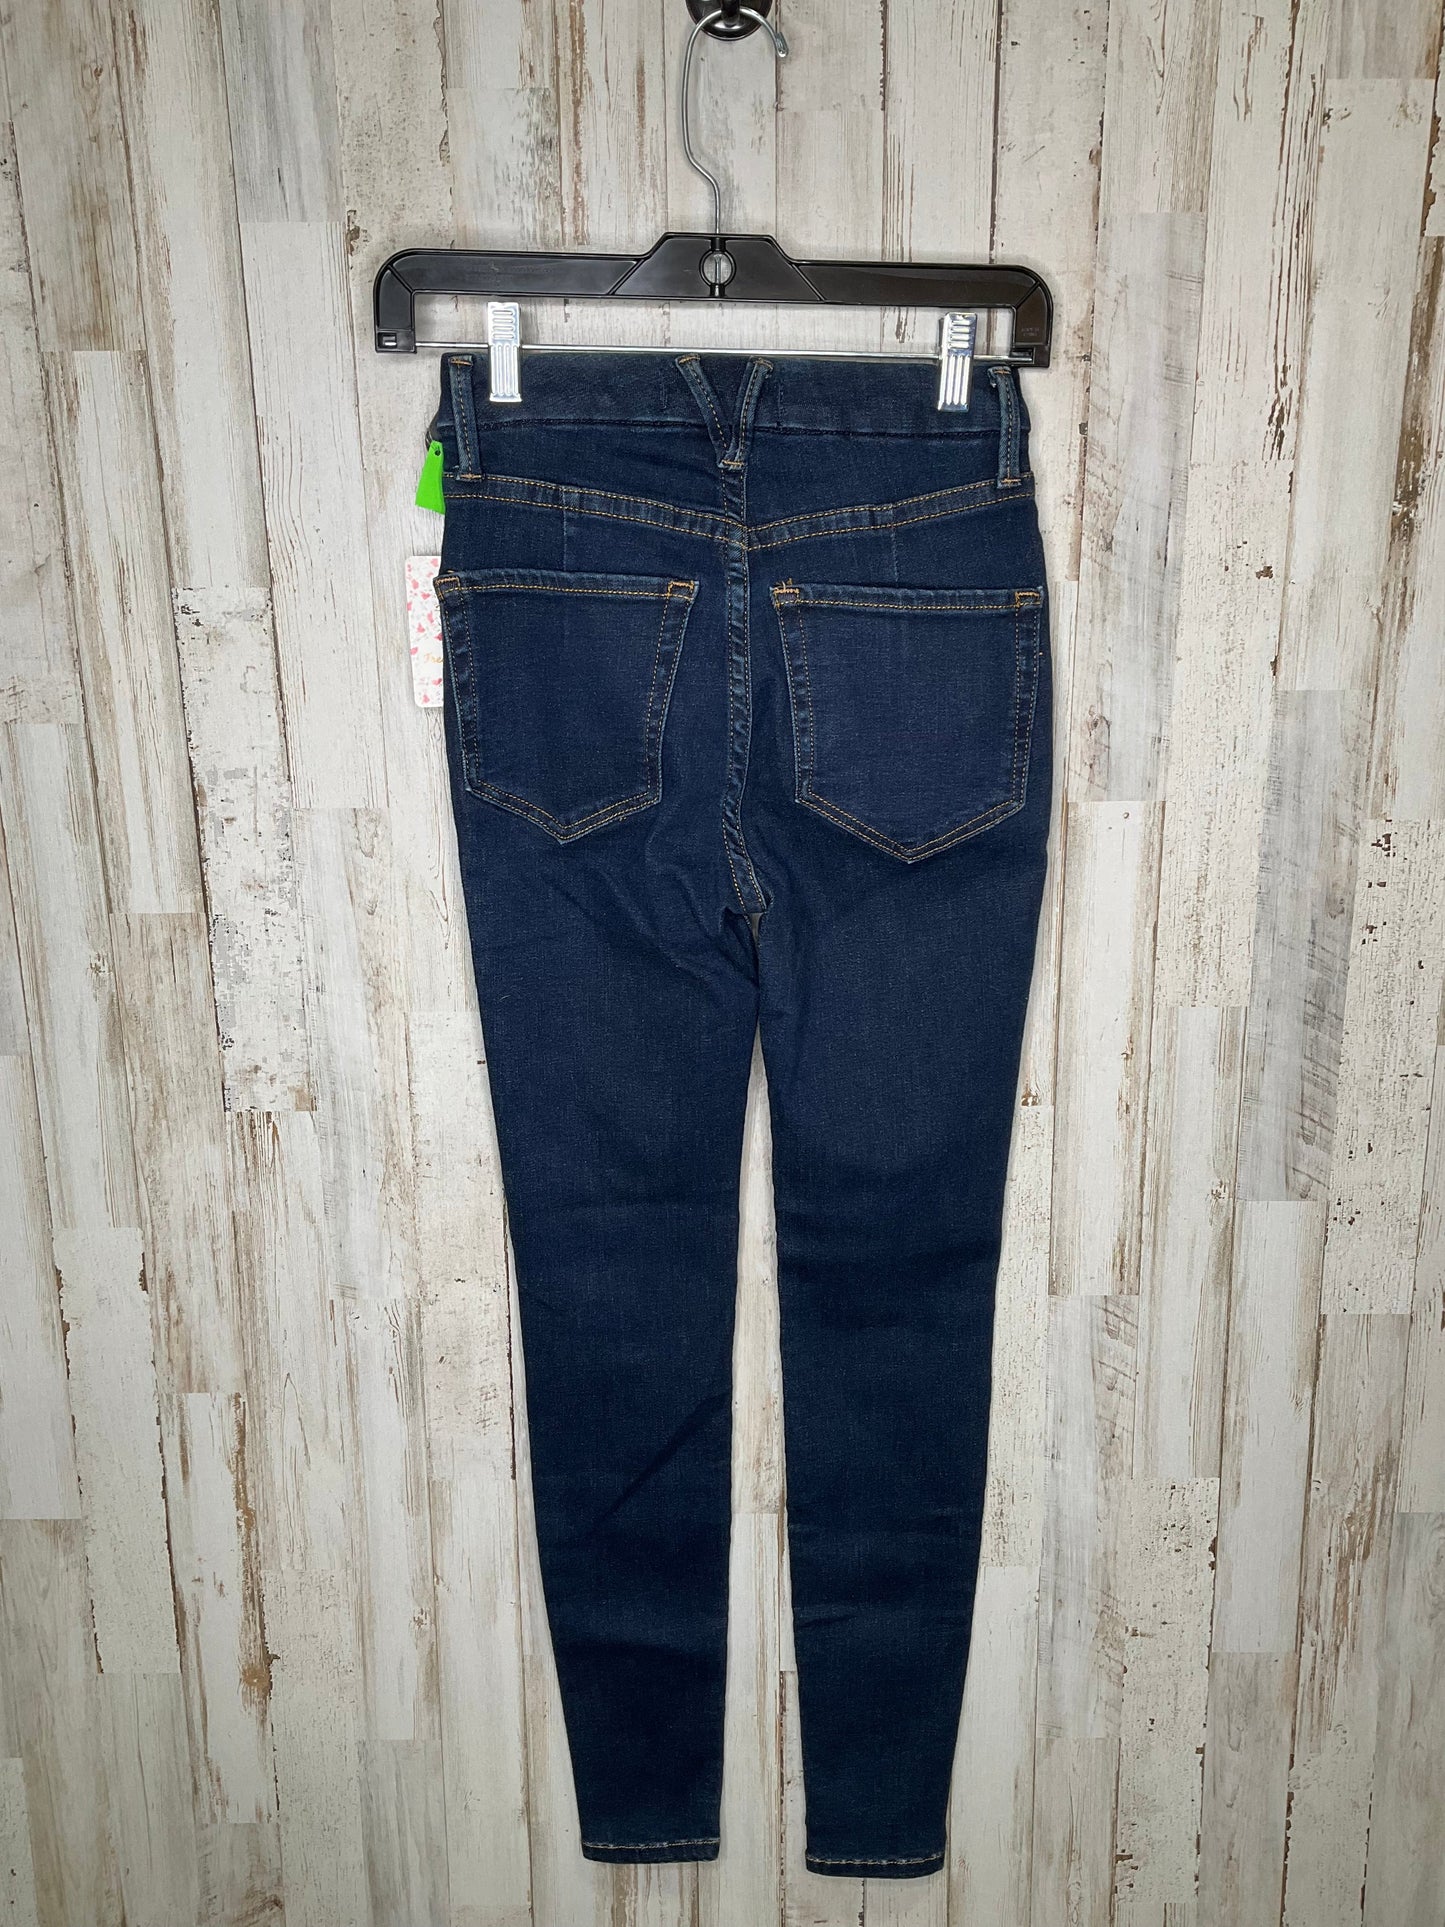 Jeans Skinny By We The Free  Size: 0